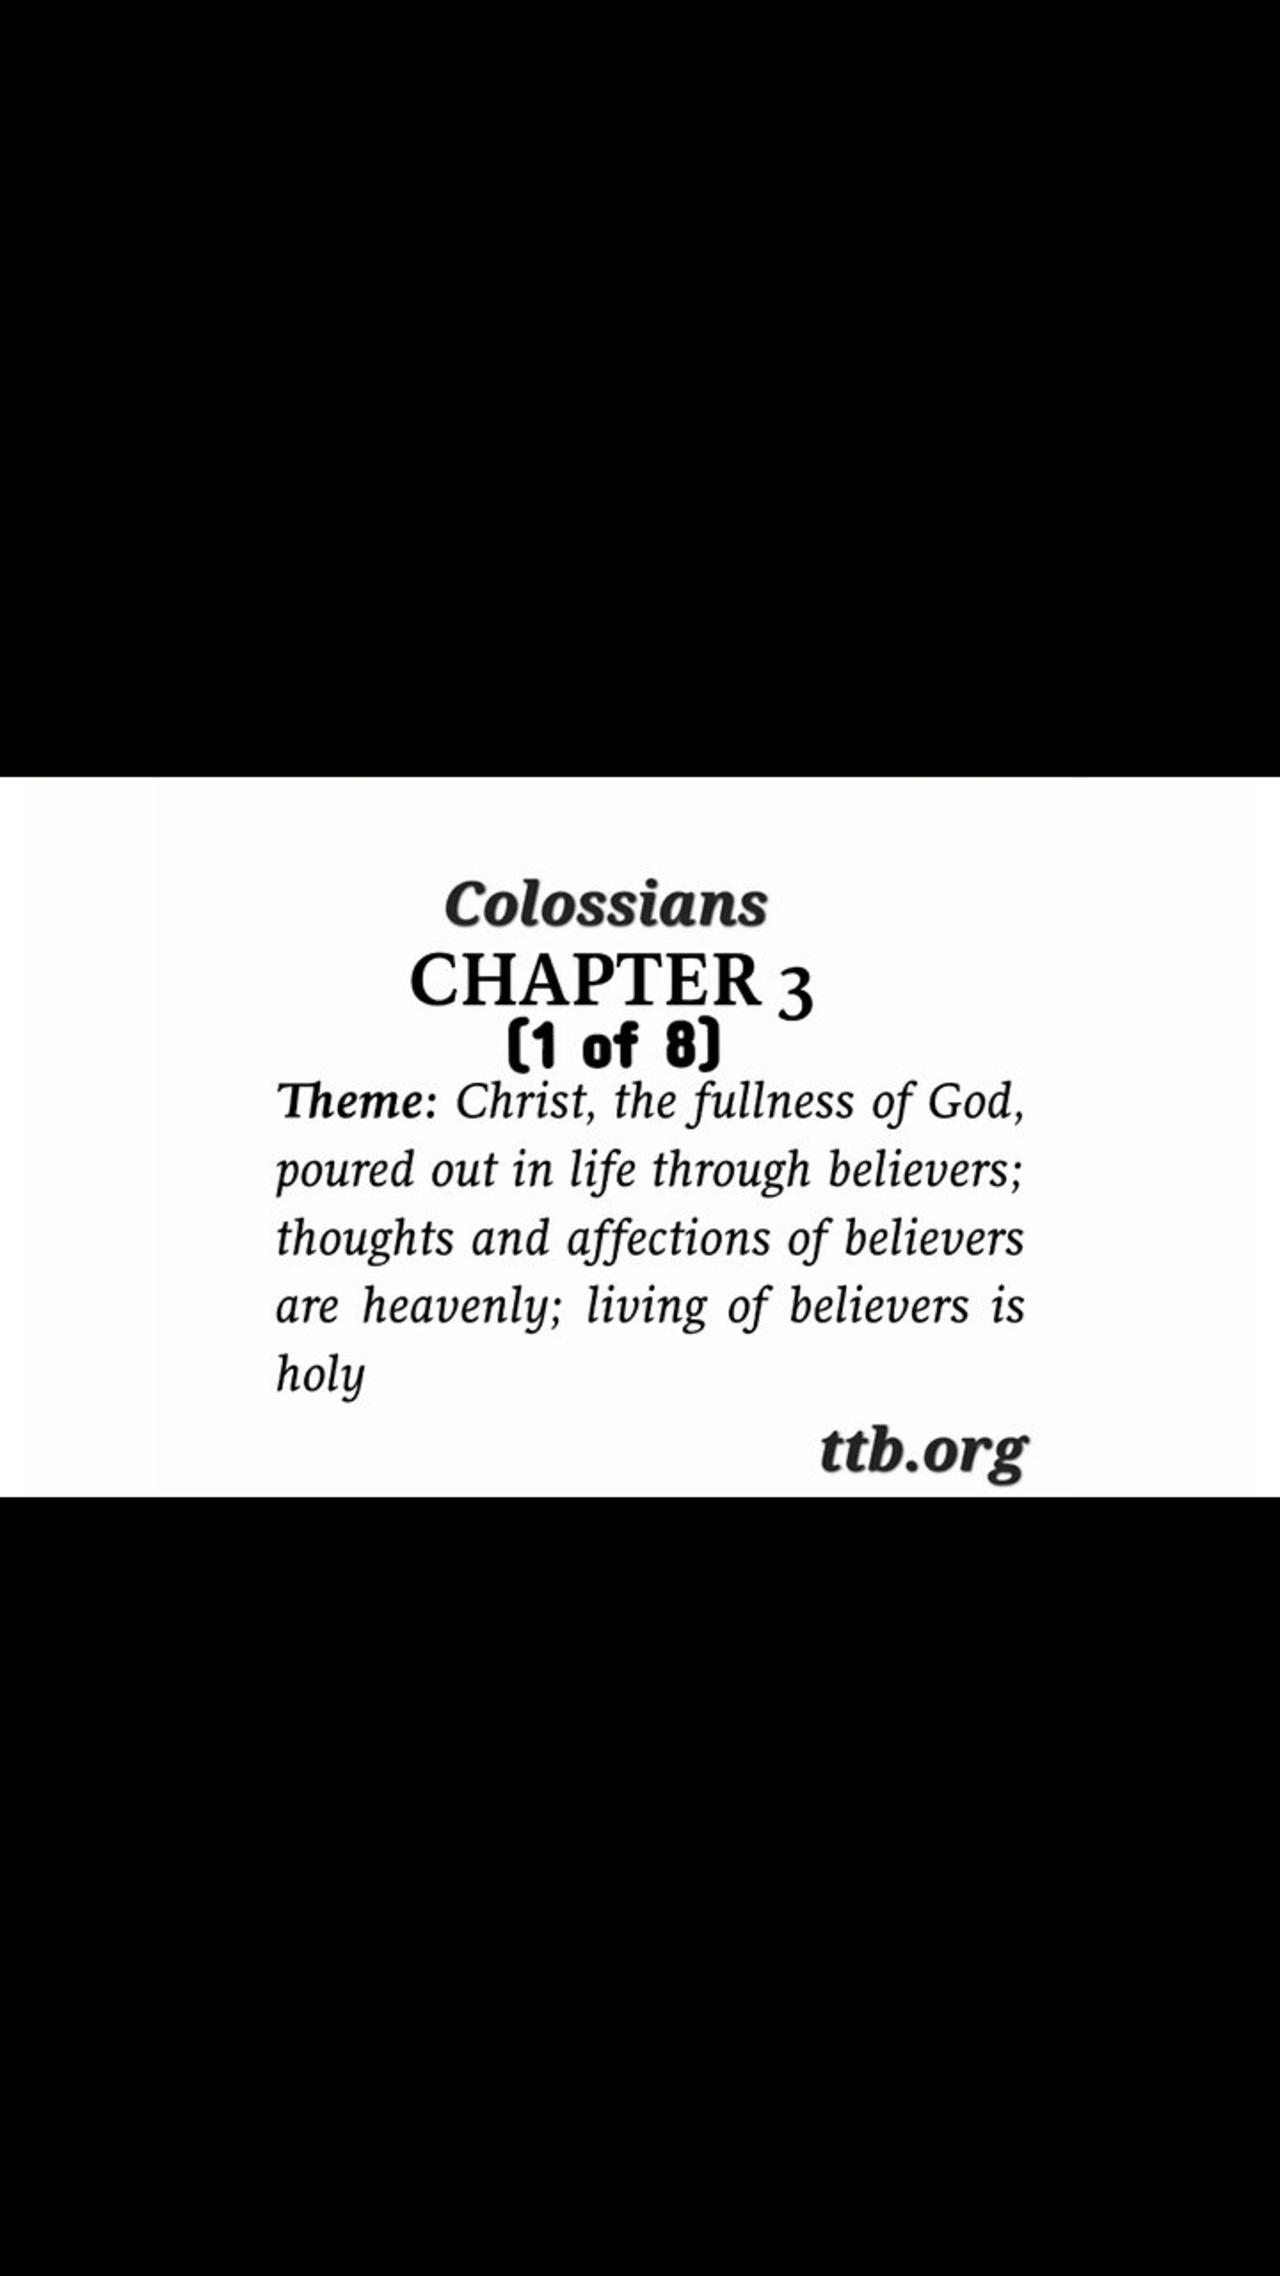 Colossians Chapter 3 (Bible Study) (1 of 8)